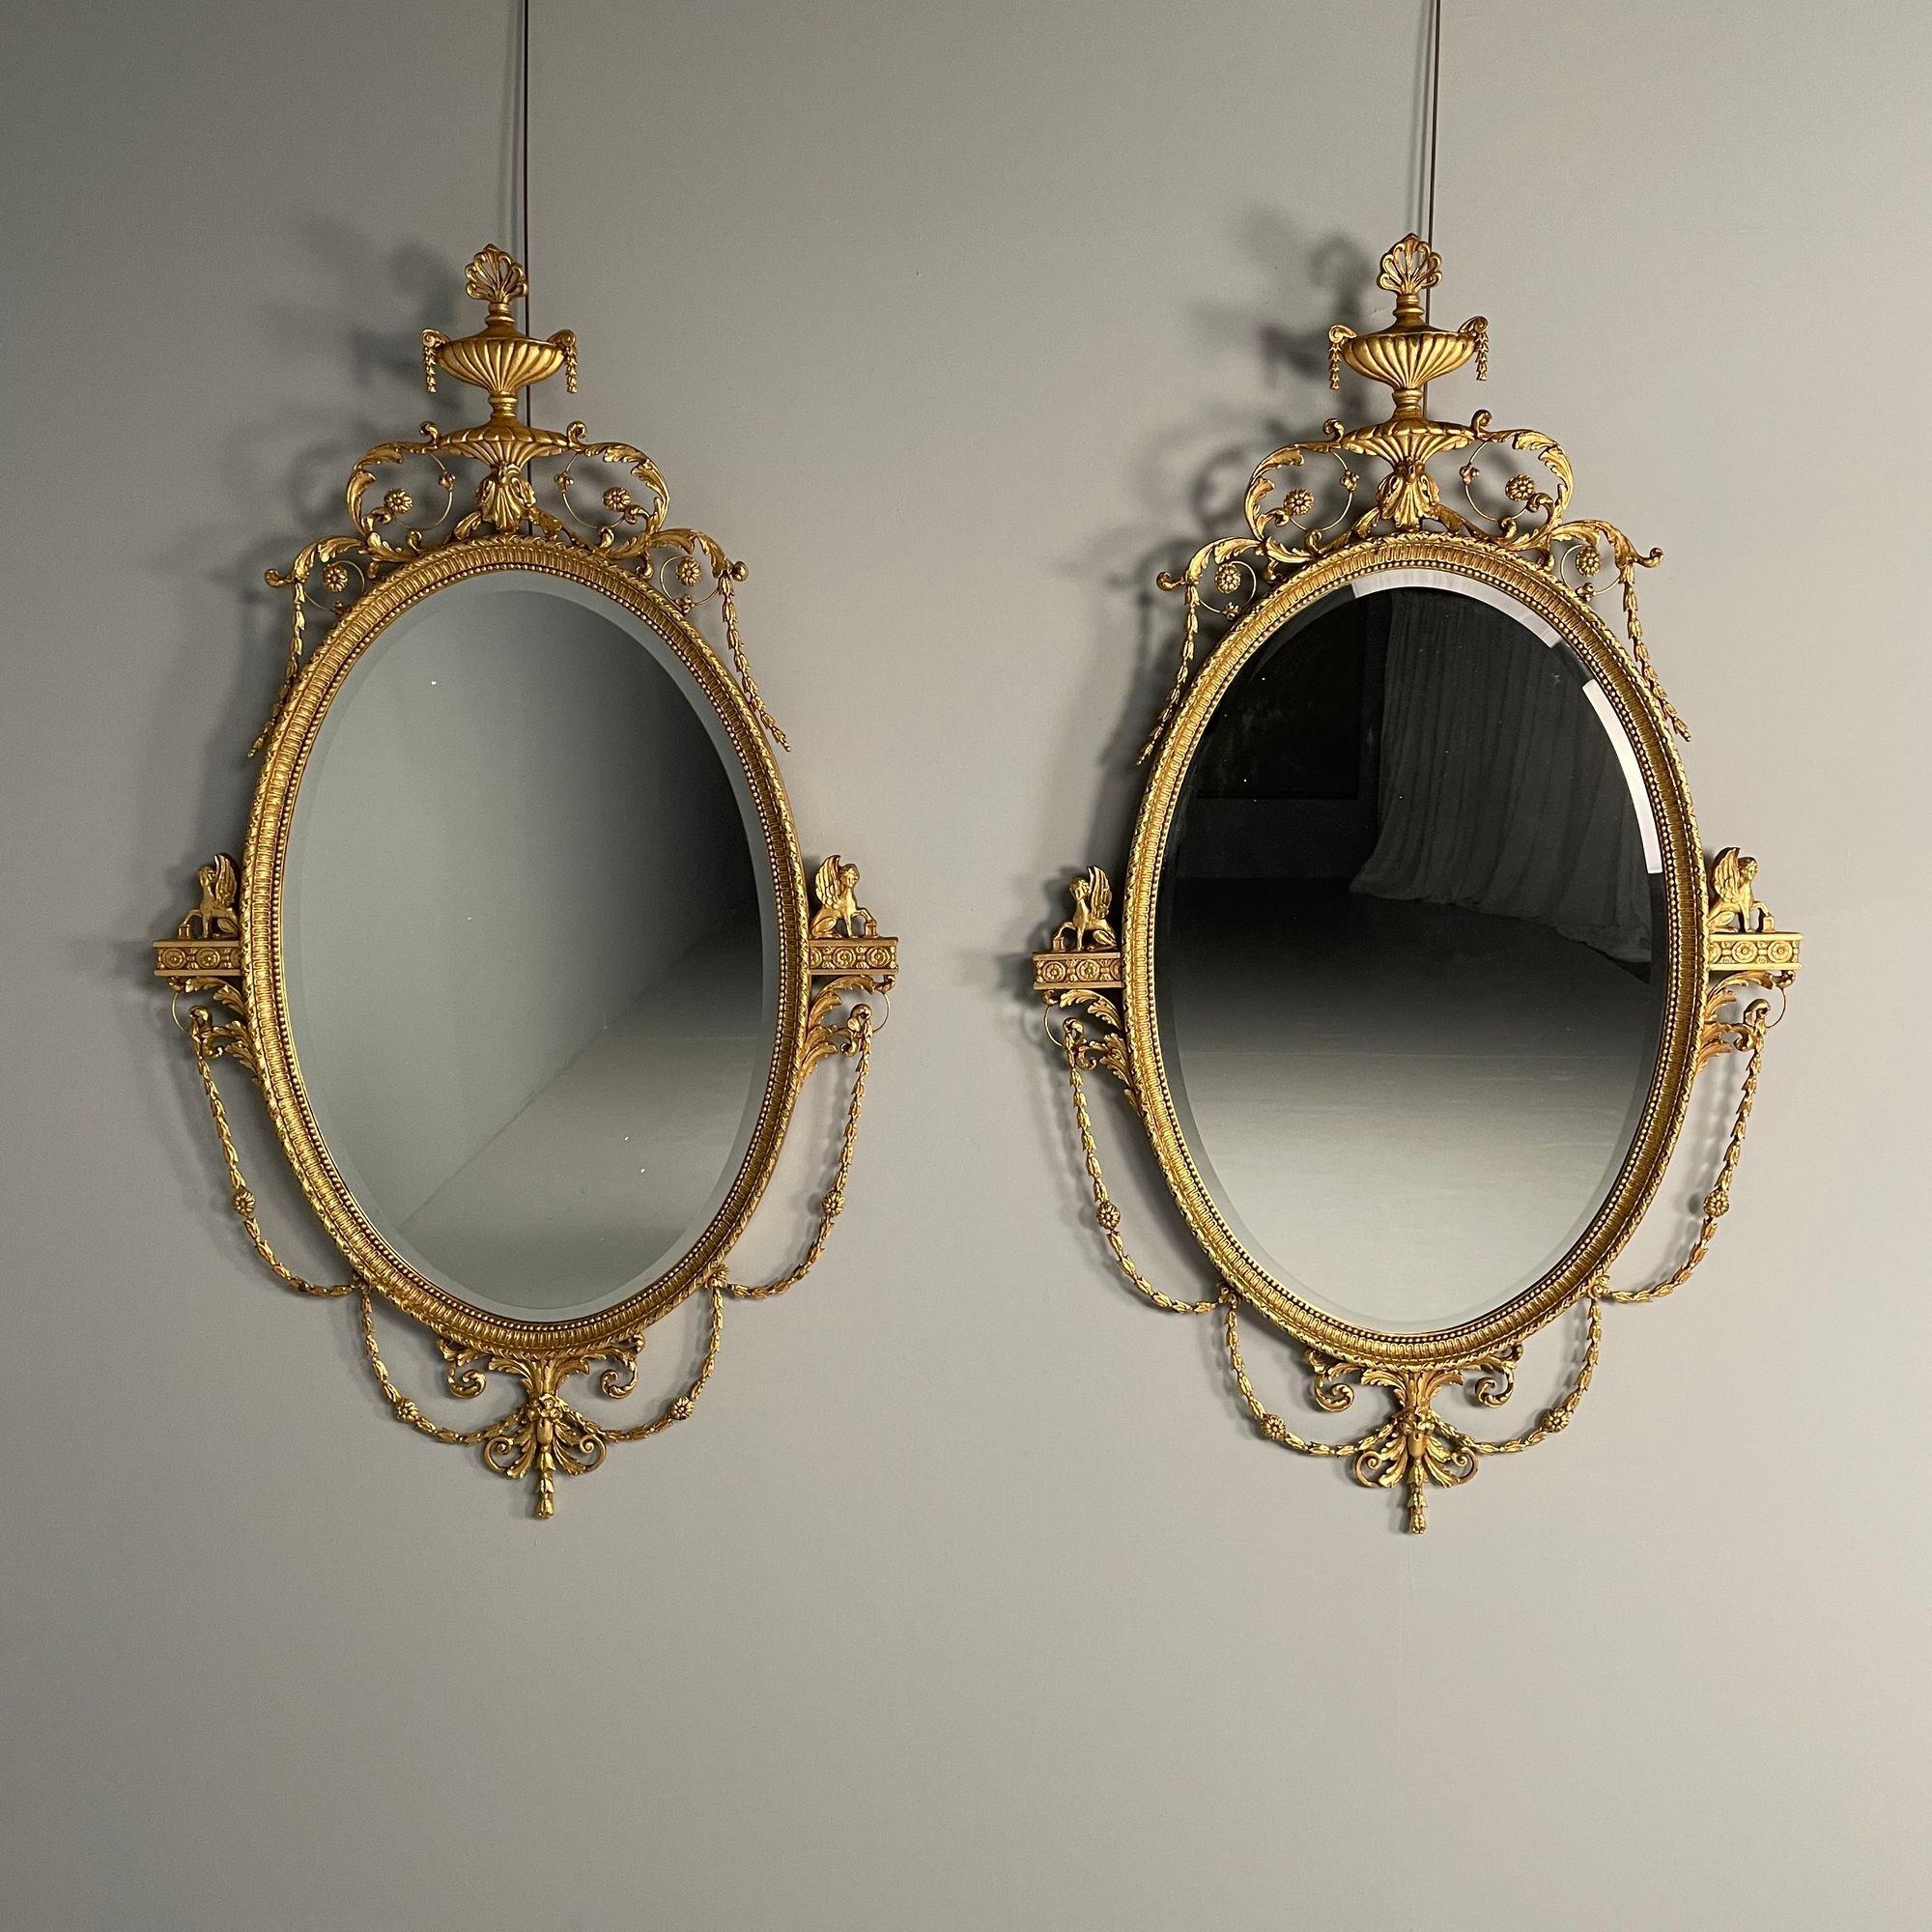 Friedman Brothers, English Regency Style, Oval Wall Mirrors, Giltwood, Gesso In Good Condition For Sale In Stamford, CT